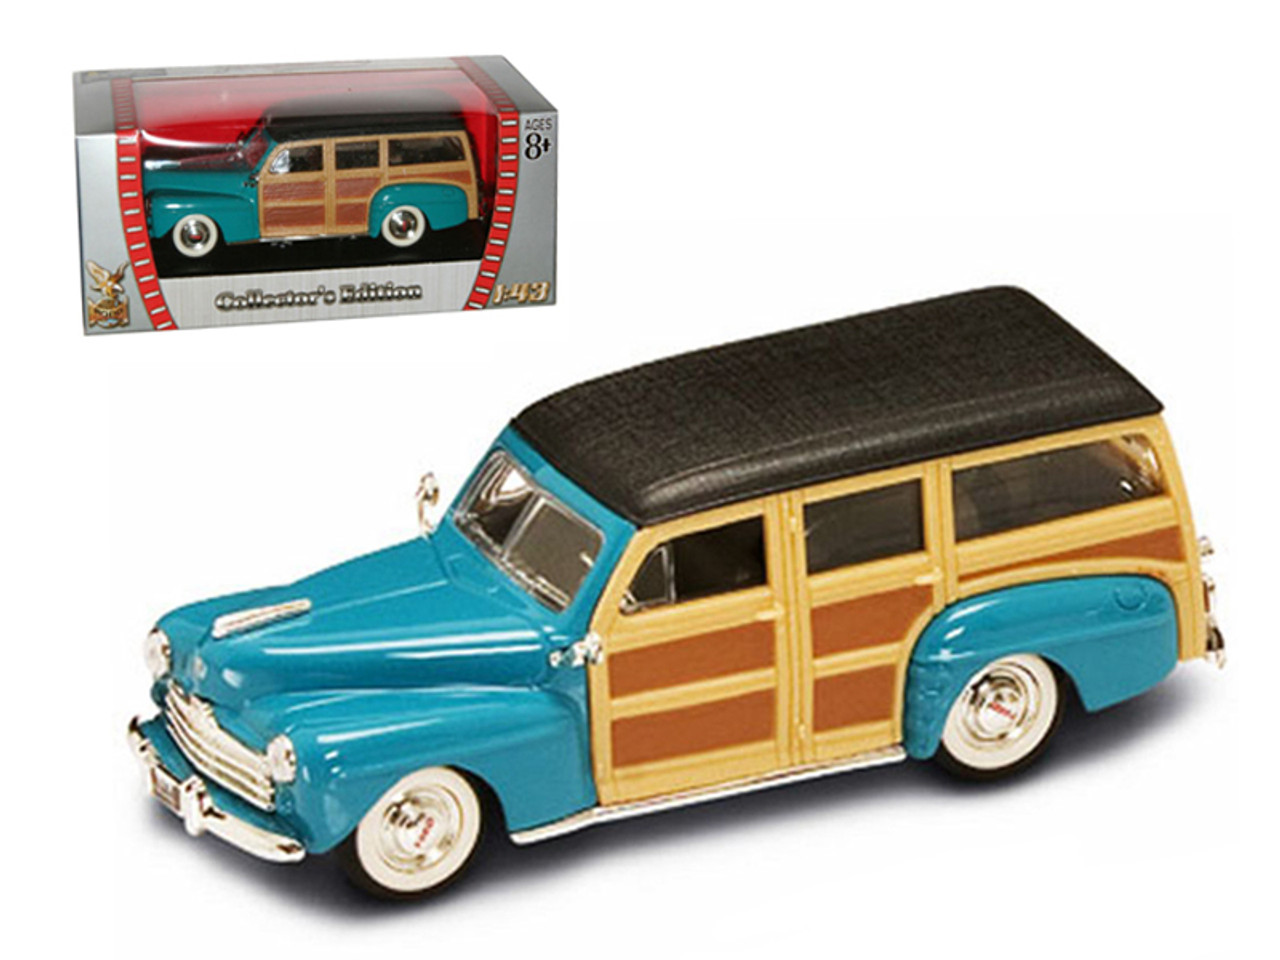 1948 Ford Woody Turquoise 1/43 Diecast Car by Road Signature